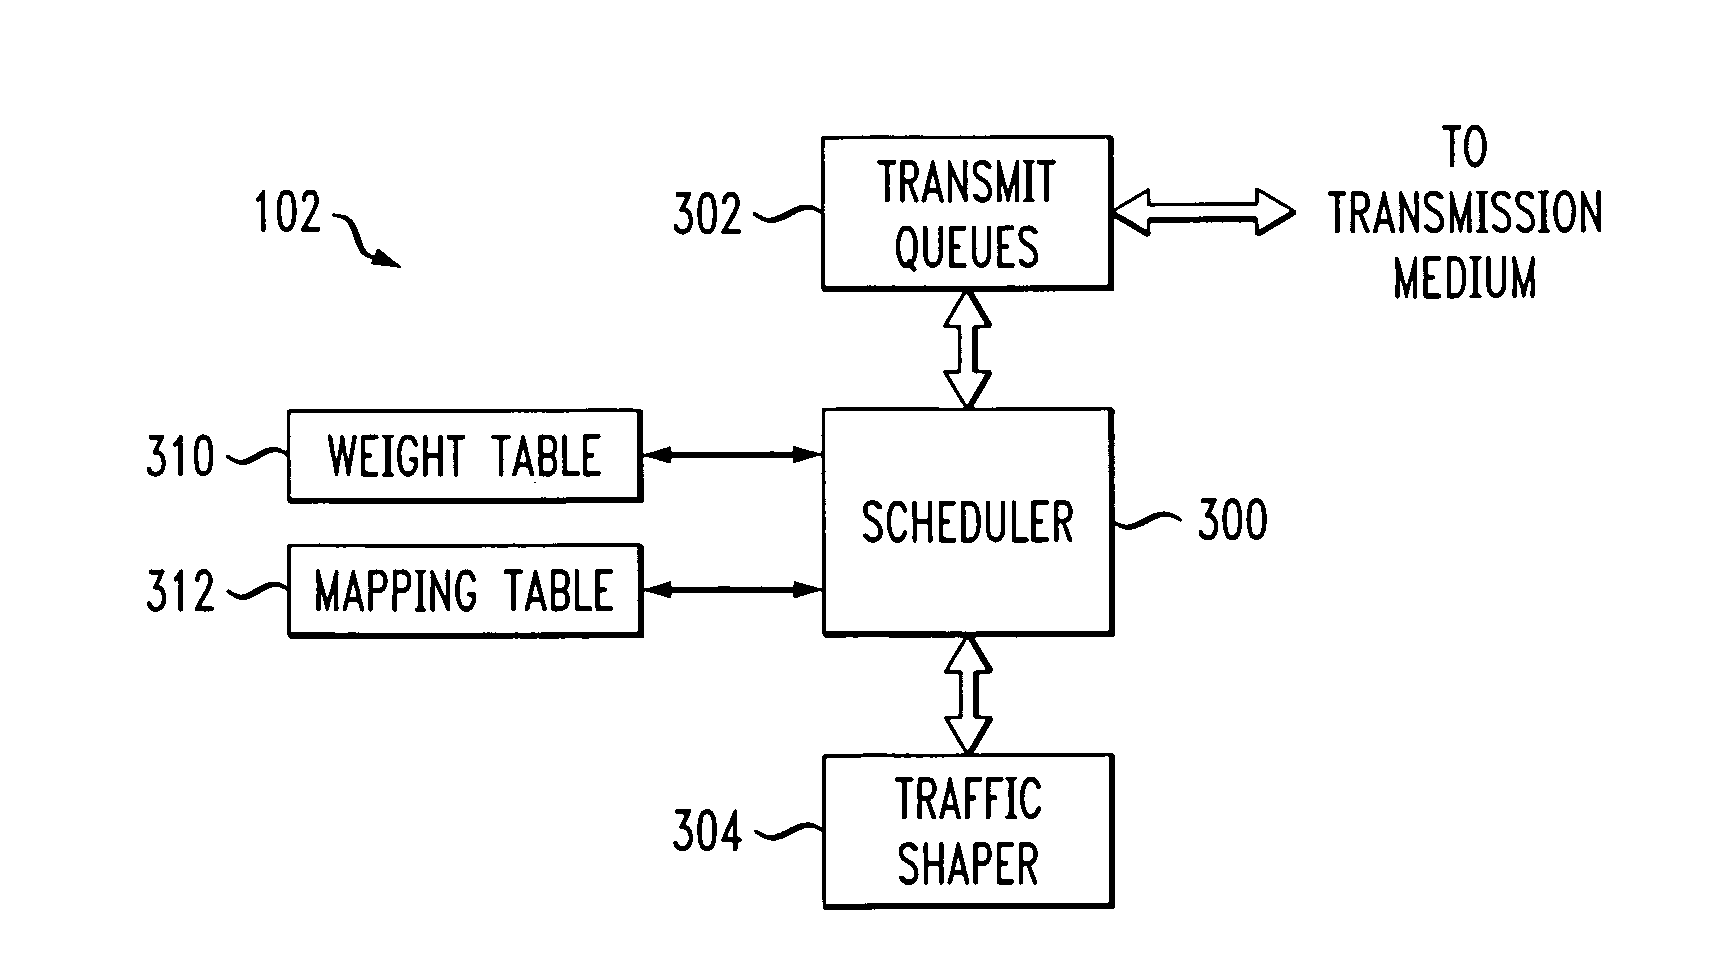 Frame mapping scheduler for scheduling data blocks using a mapping table and a weight table